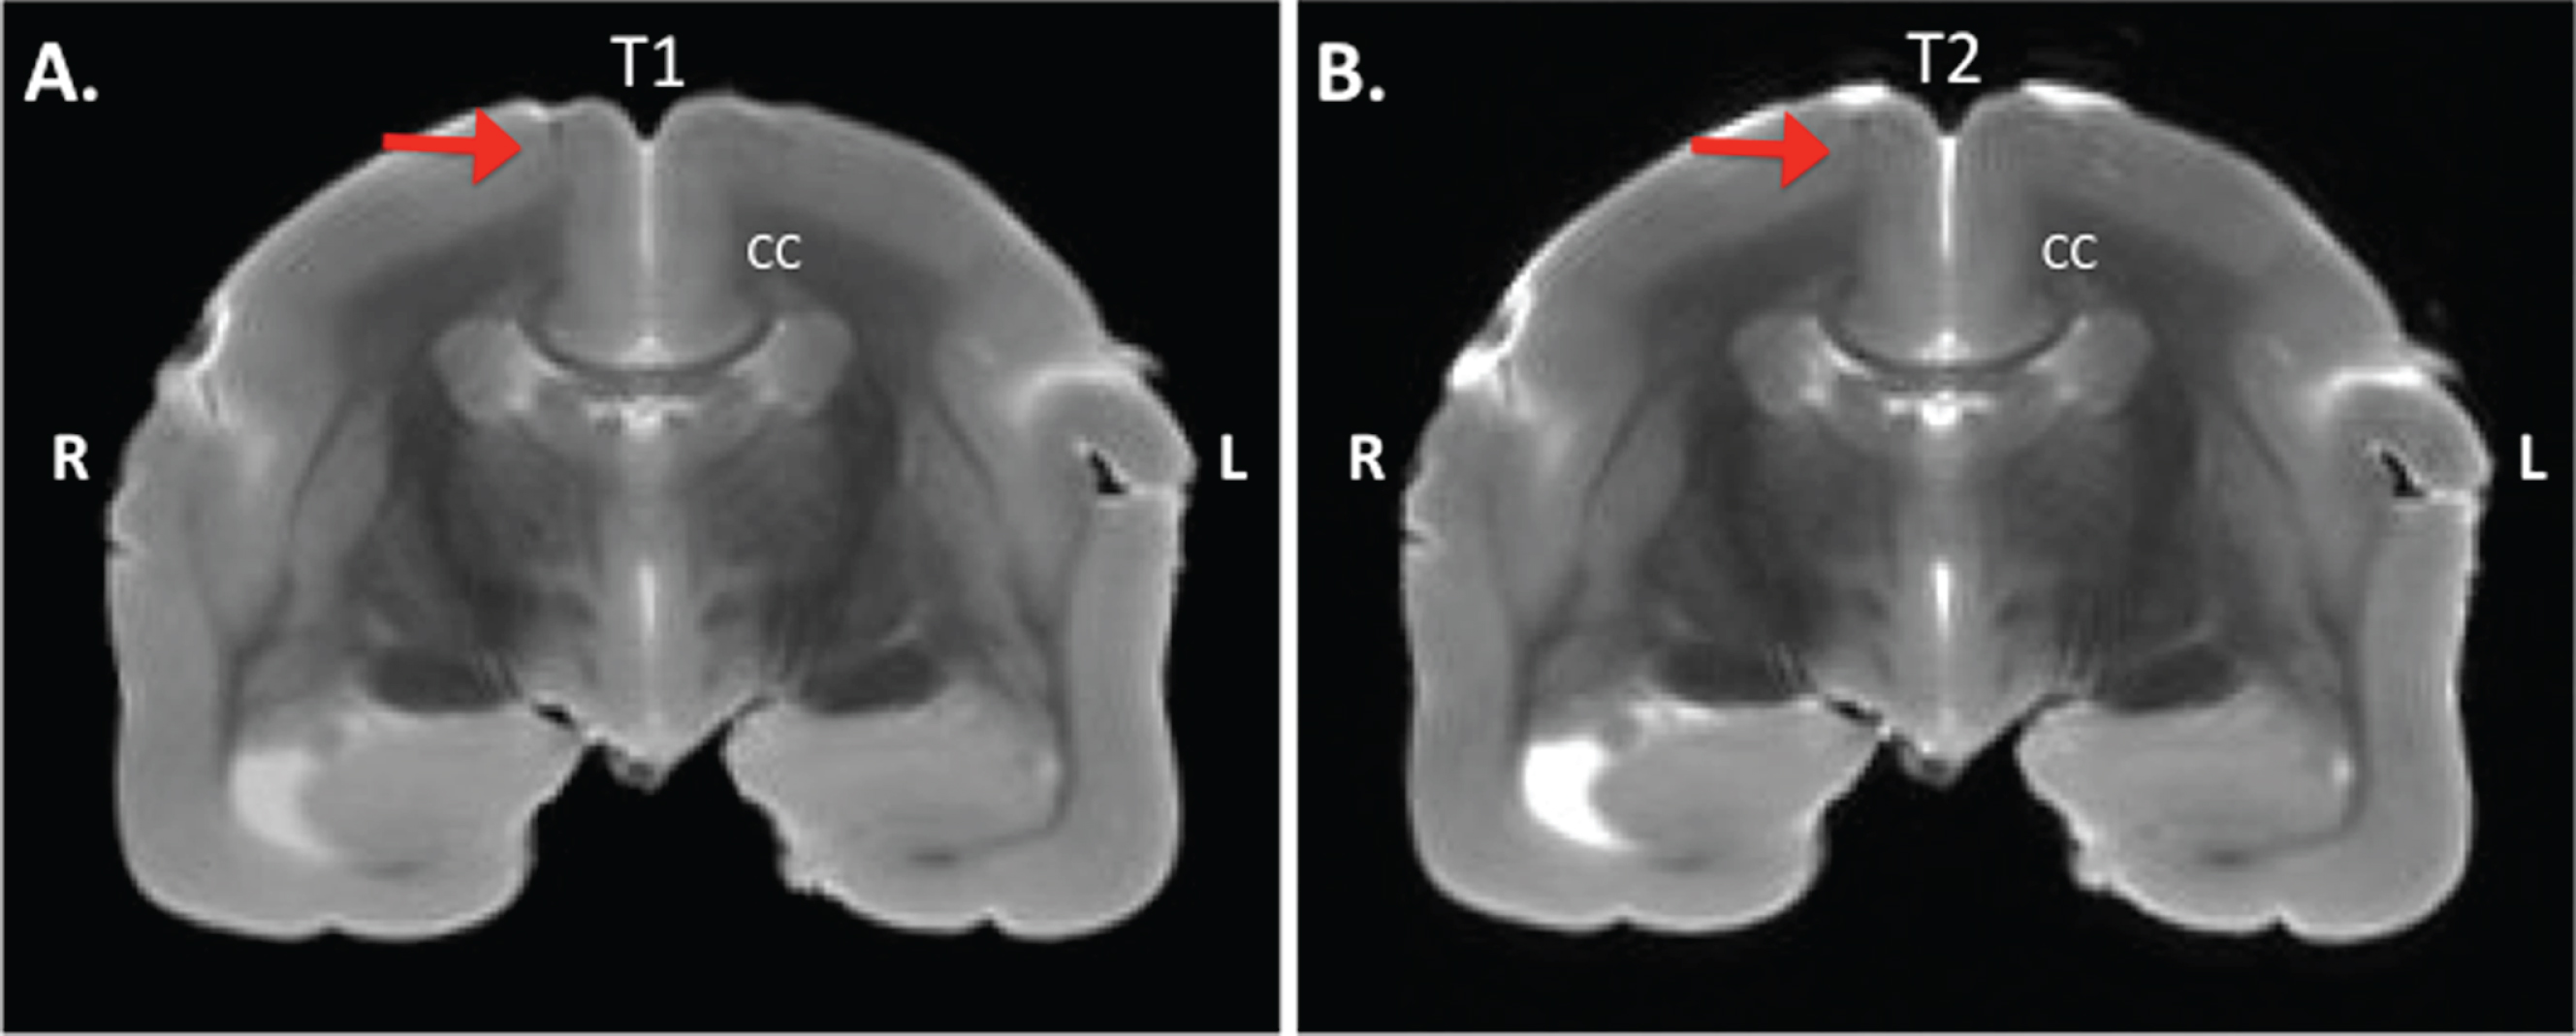 Postmortem MRI of a transcranial section of a marmoset brain. MRI is taken at +4 mm from Bregma on the anterior-posterior axis from an Aβ+LPS treated monkey. A) IR-RARE T1 weighed image, and B) TurboRARE T2 weighed image. The red arrow indicates the location of injection. CC, corpus callosum; R, right; L, left.